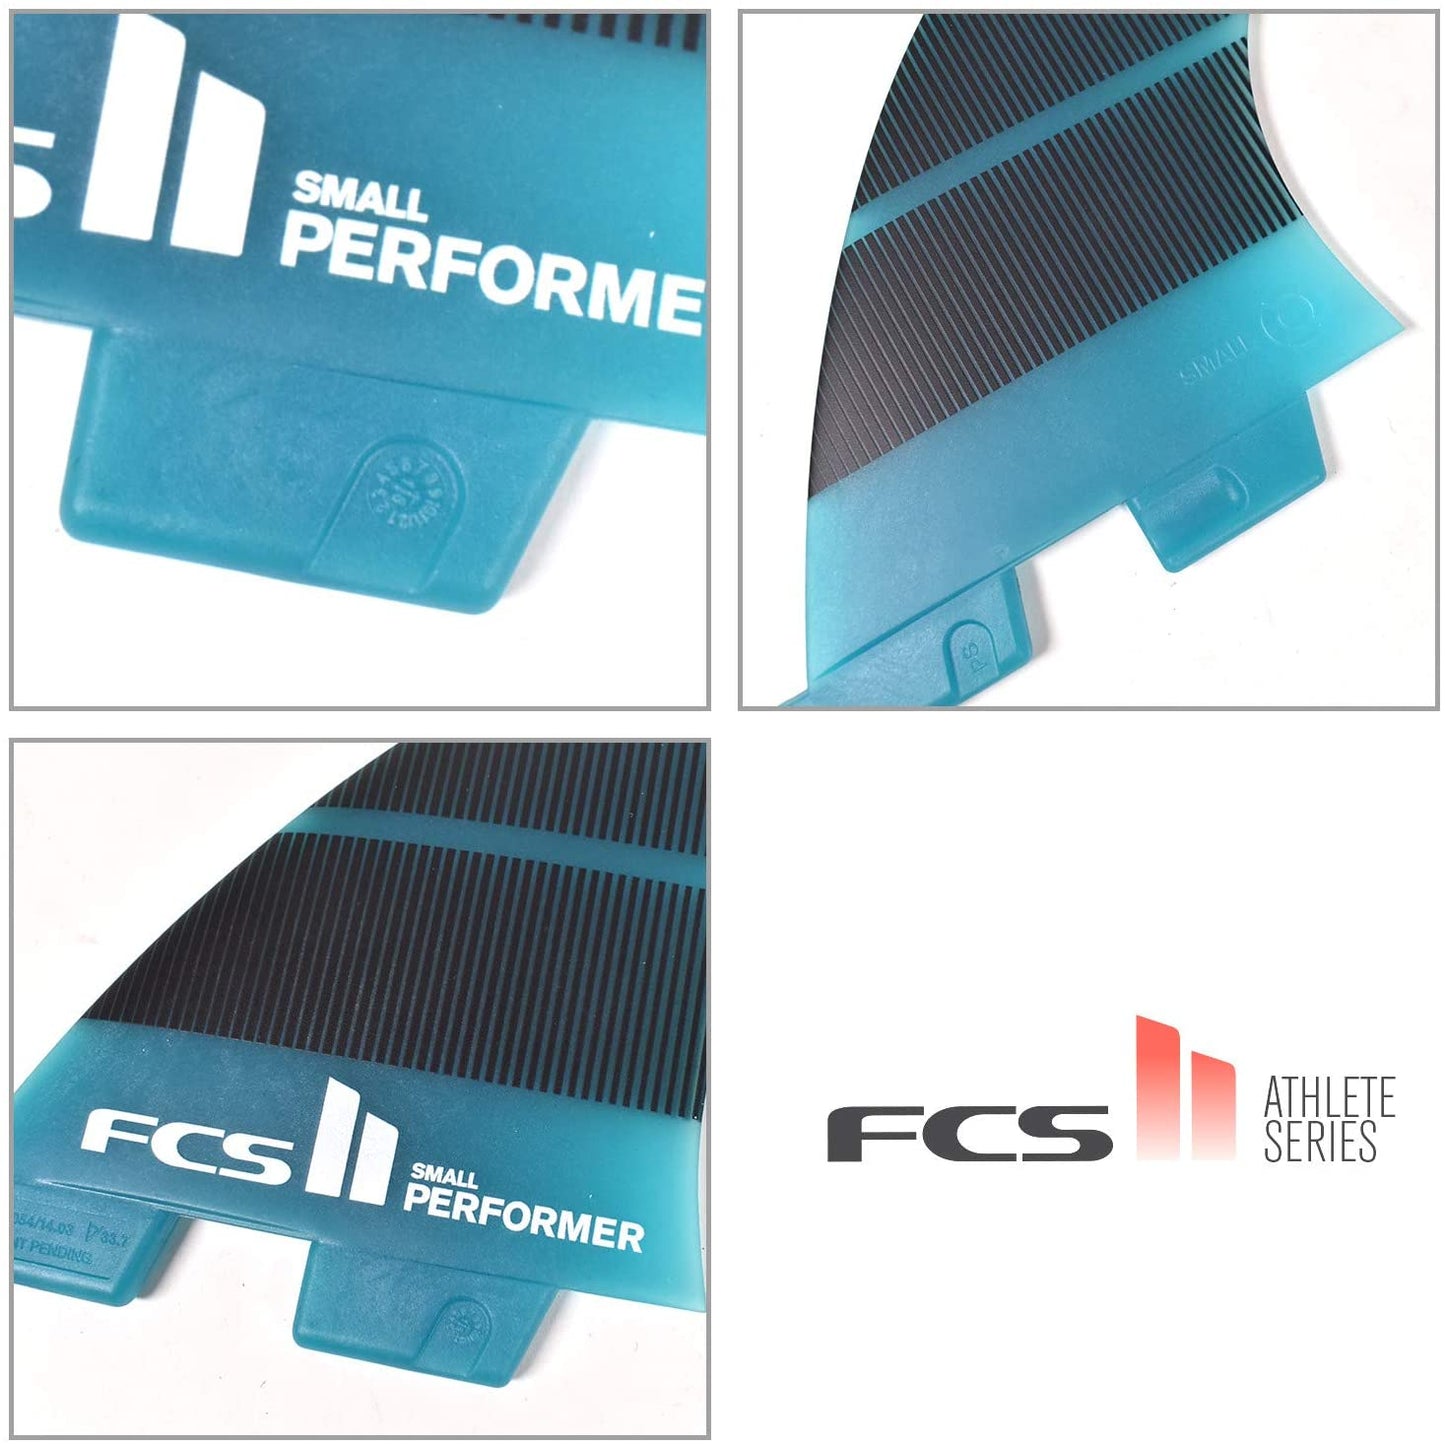 FCS 2 PERFORMER NG THRUSTER SURFBOARD FINS